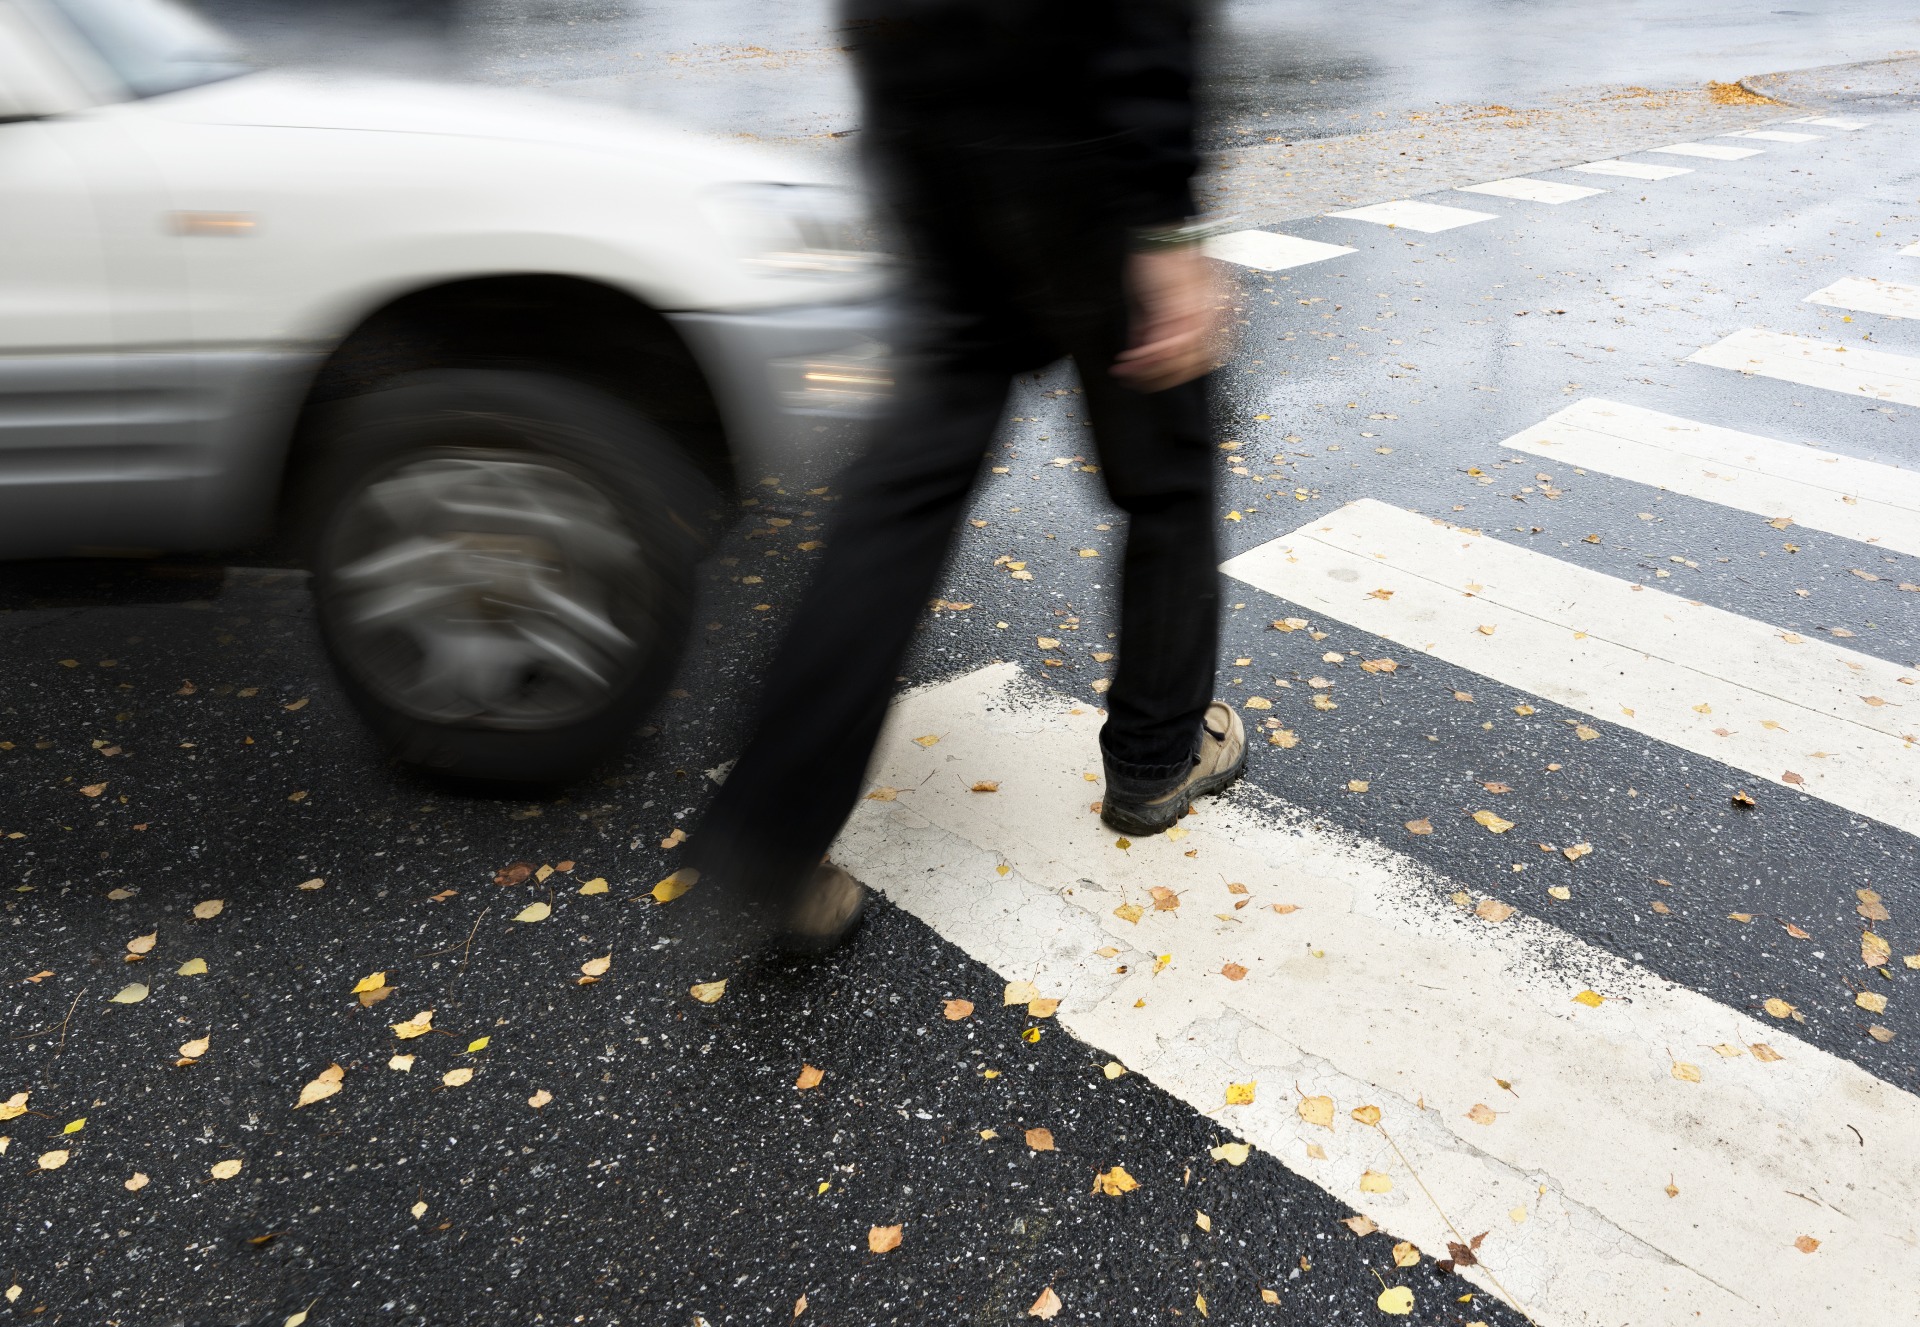 Car entering onto a zebra crossing as a man in a suit crosses the road